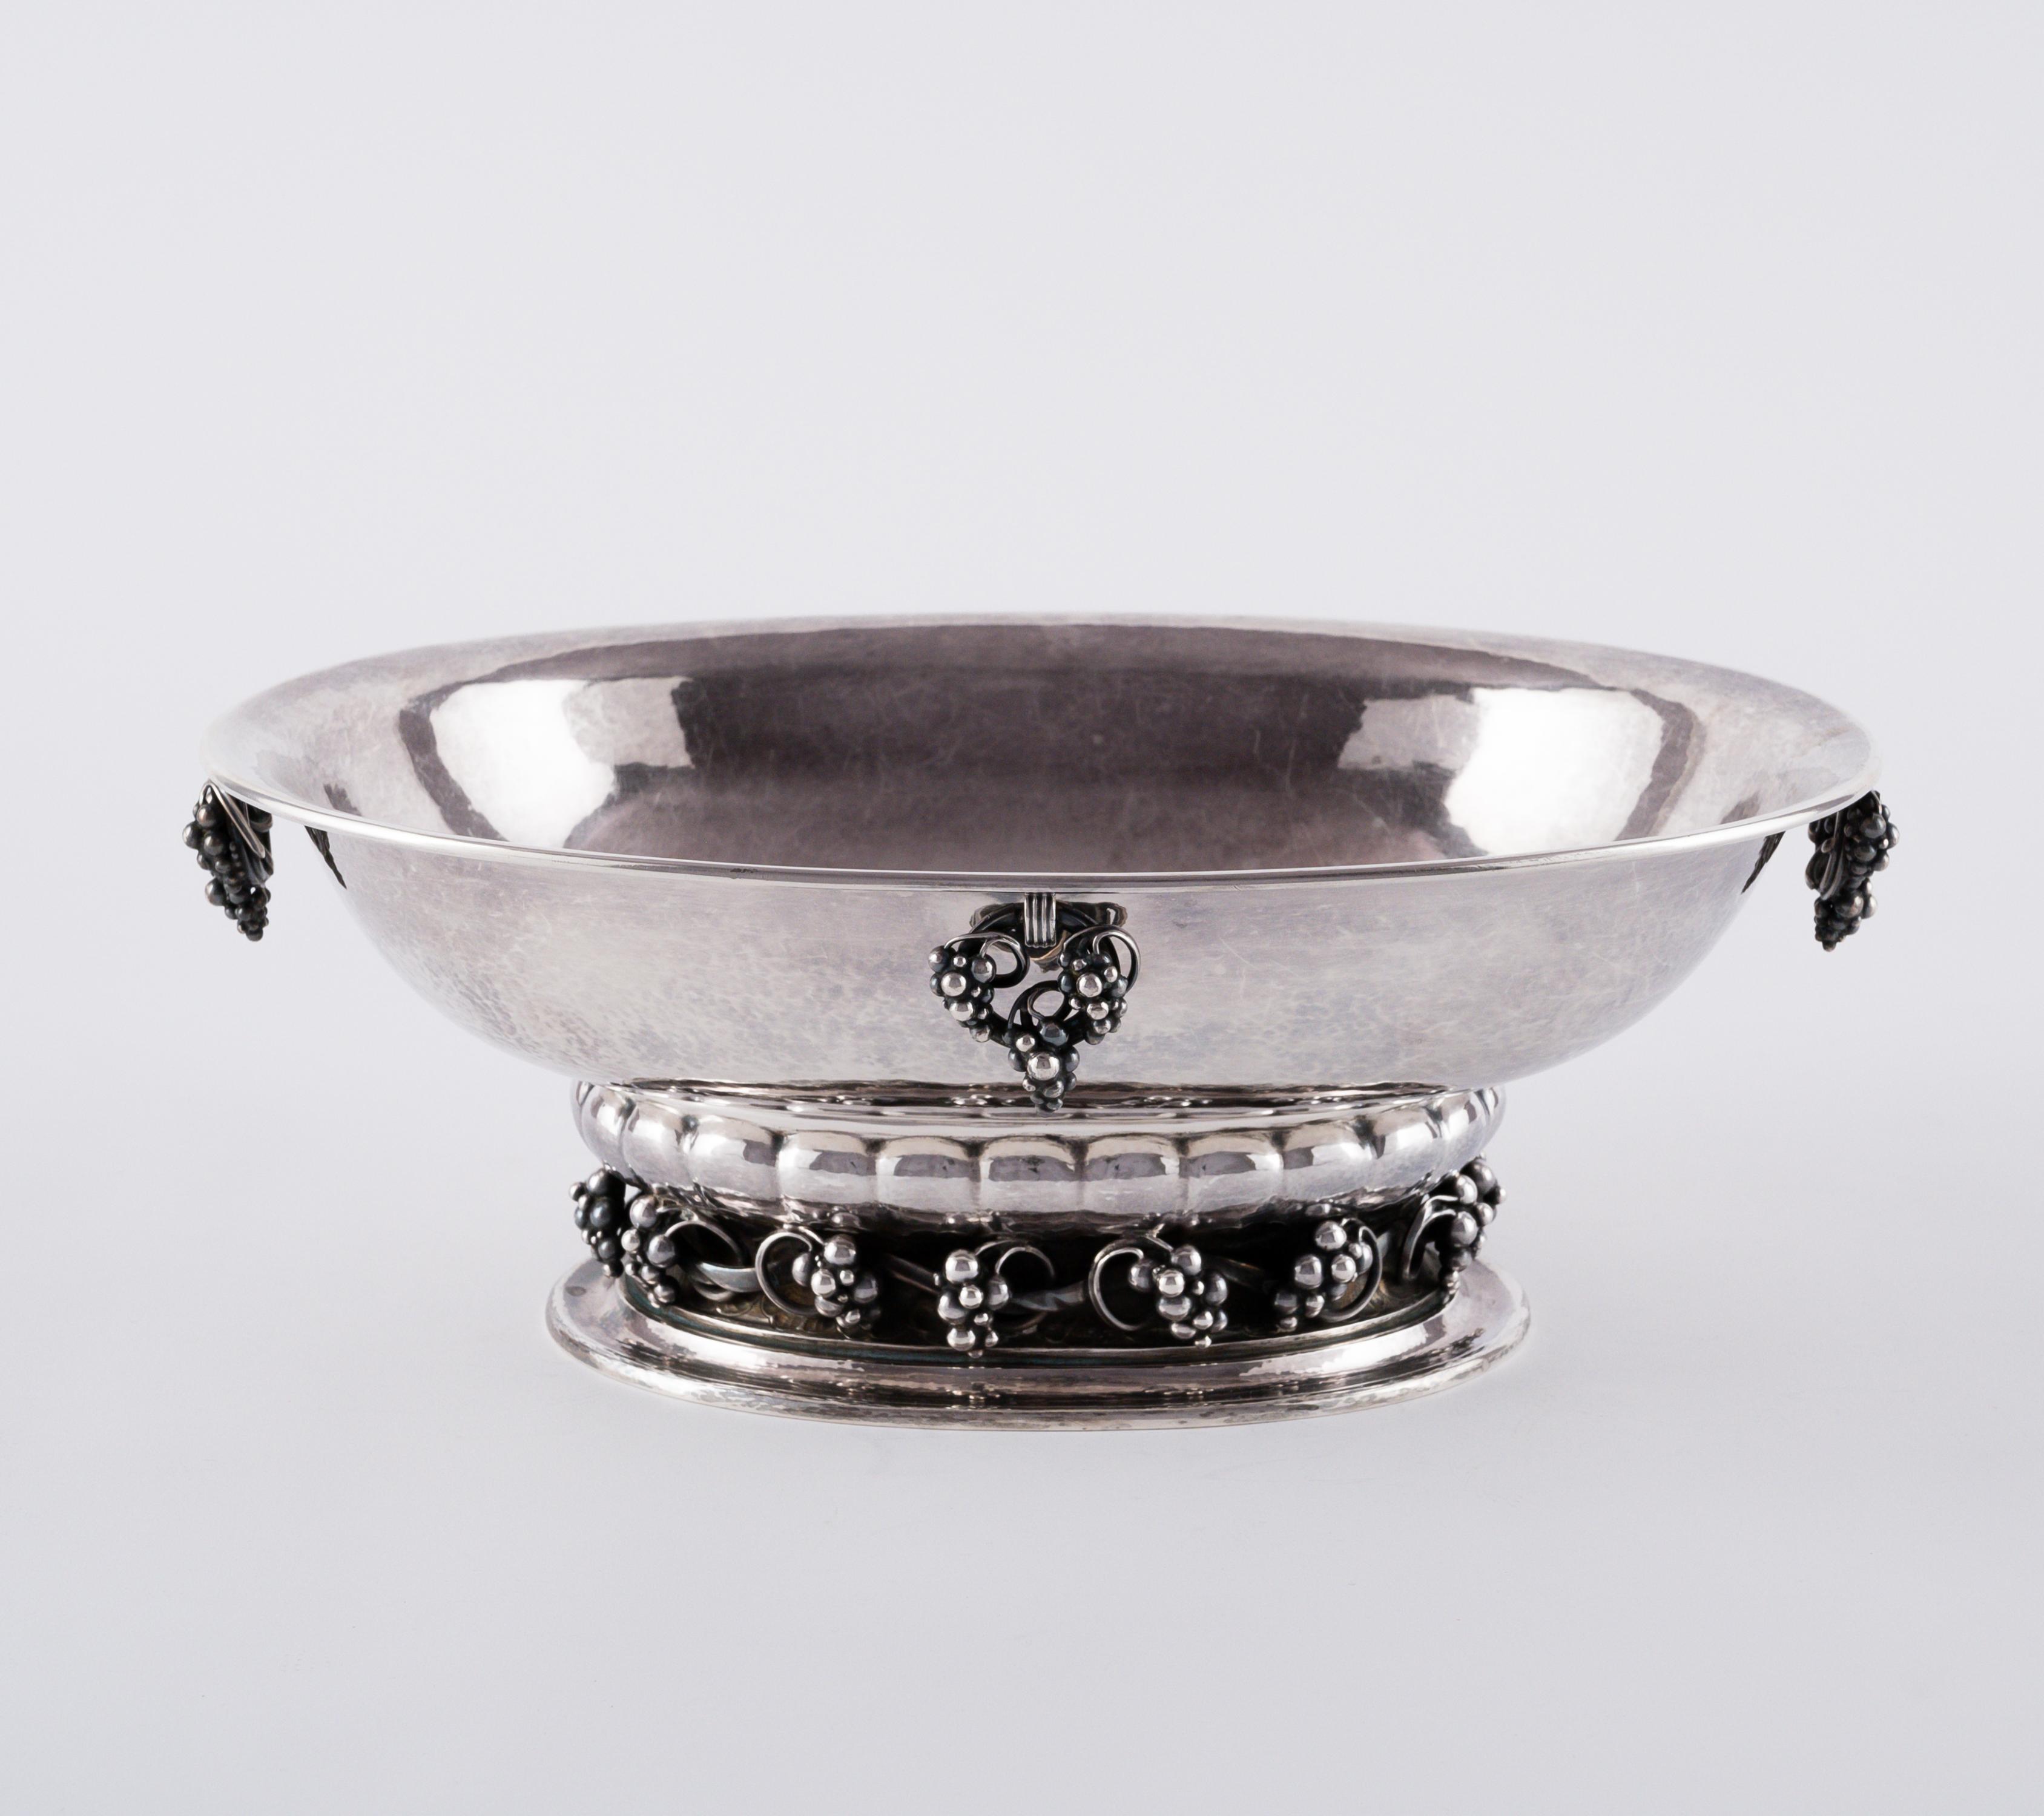 LARGE SILVER FOOTED BOWL WITH GRAPE DECOR - Image 4 of 7